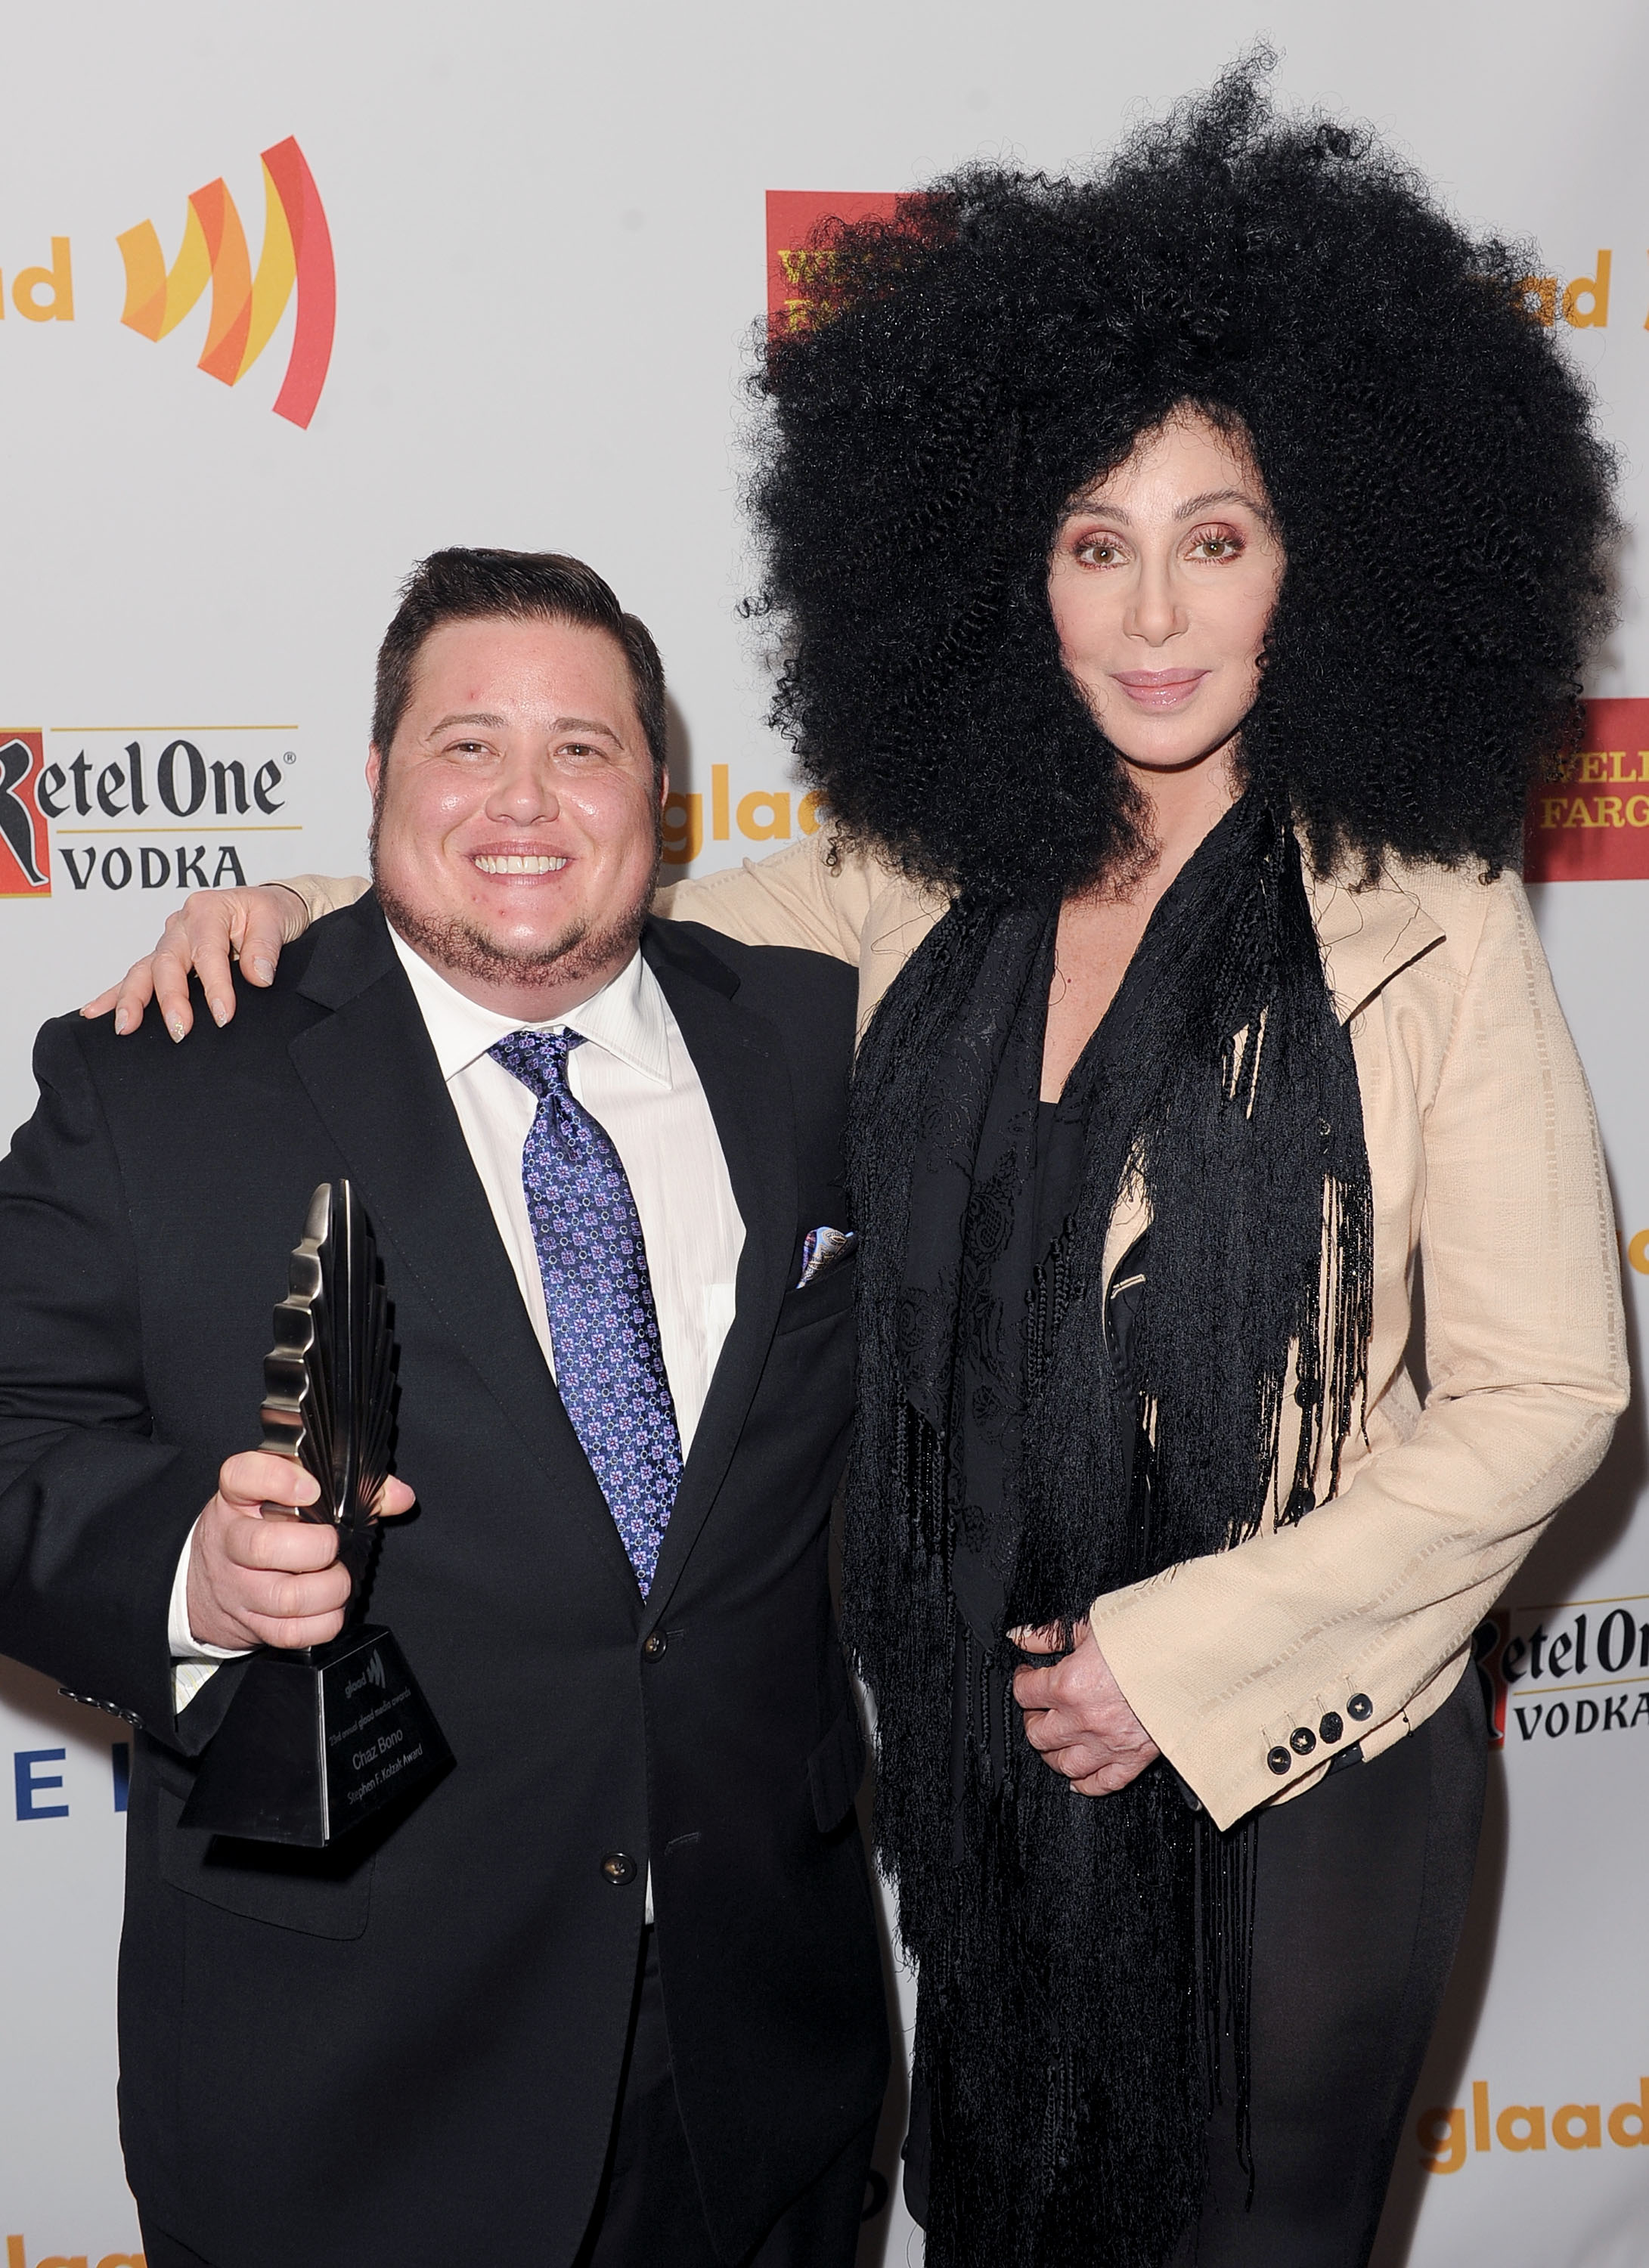 Chaz Bono and Cher backstage at the 23rd Annual GLAAD Media Awards presented by Ketel One and Wells Fargo held at Westin Bonaventure Hotel in Los Angeles, California, on April 21, 2012. | Source: Getty Images